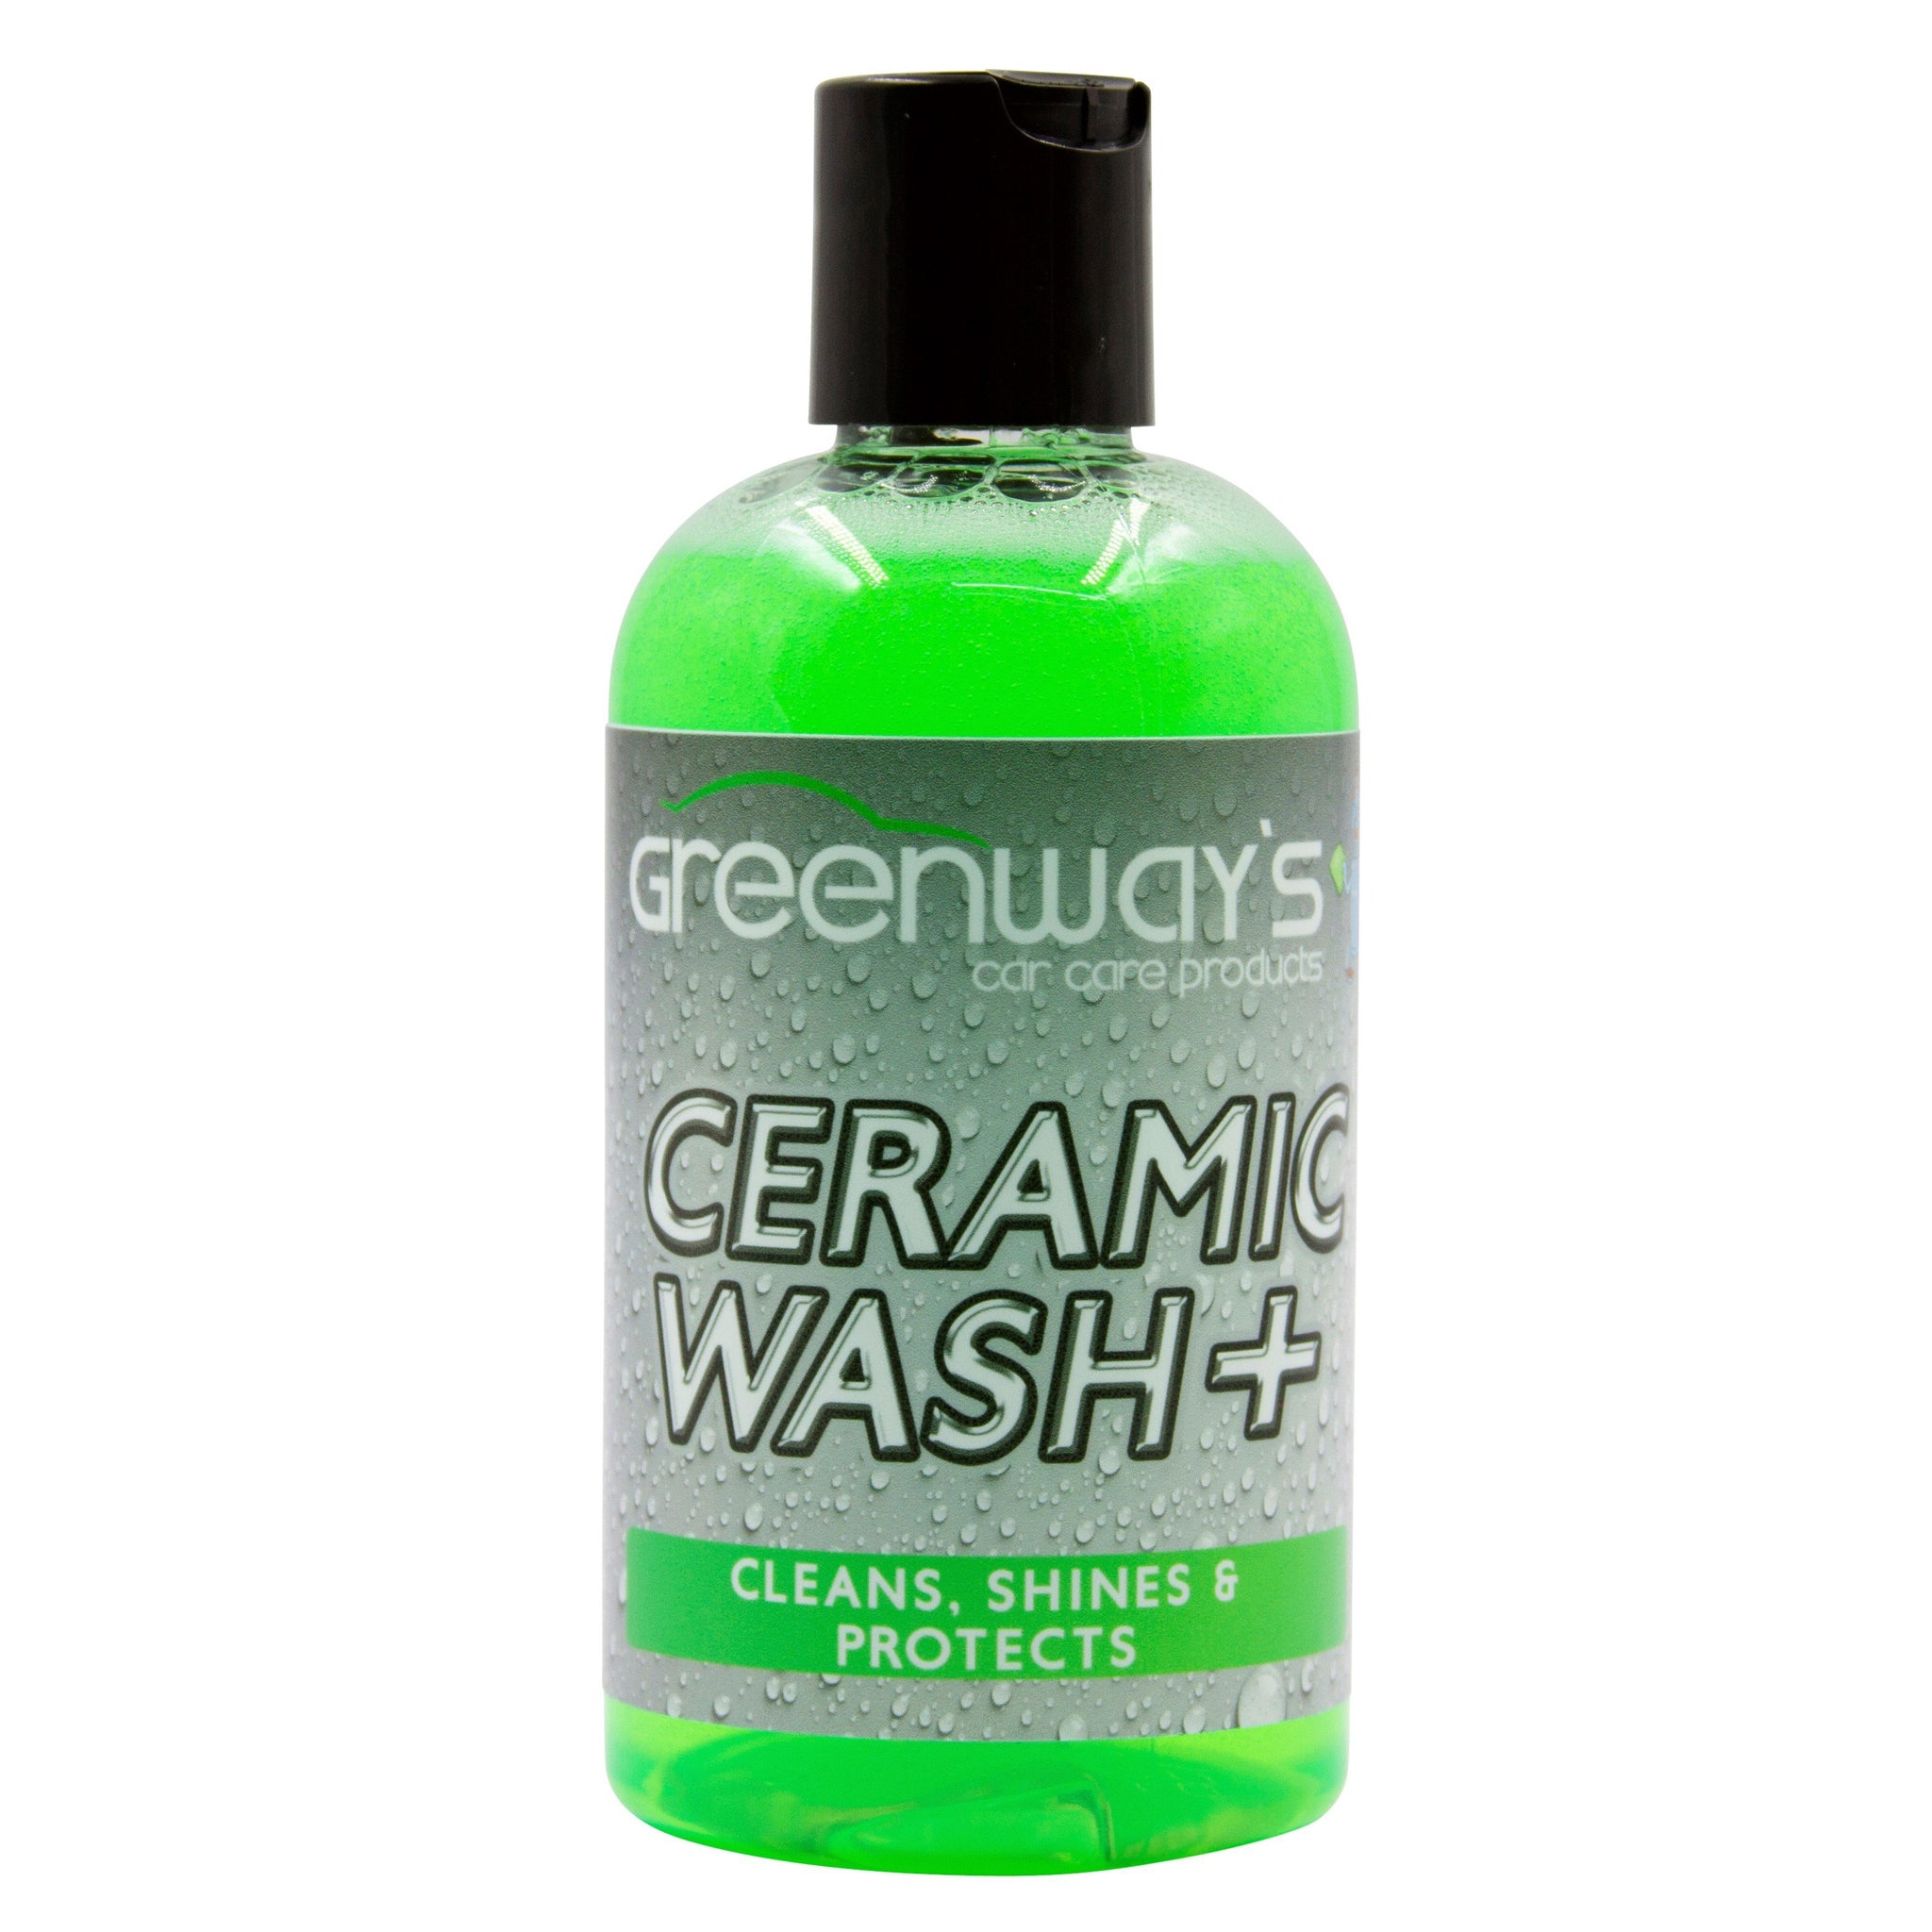 Greenway’s Ceramic Wash +, Si02 ceramic infused highly concentrated car soap with extreme foam and custom scent, 8 ounces.